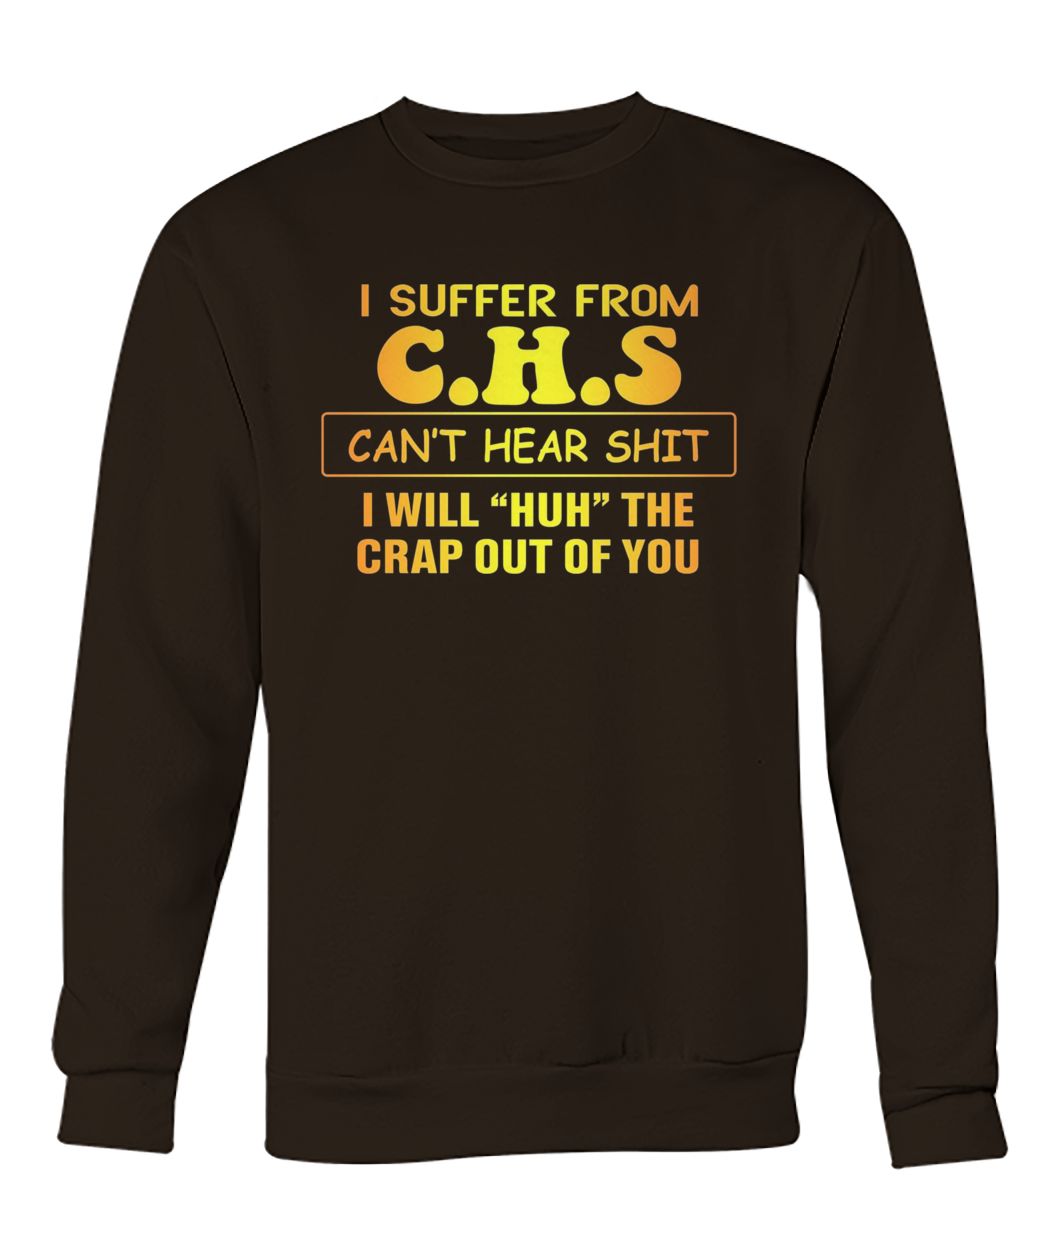 I suffer from CHS can't hear shit I will huh the crap out of you crew neck sweatshirt